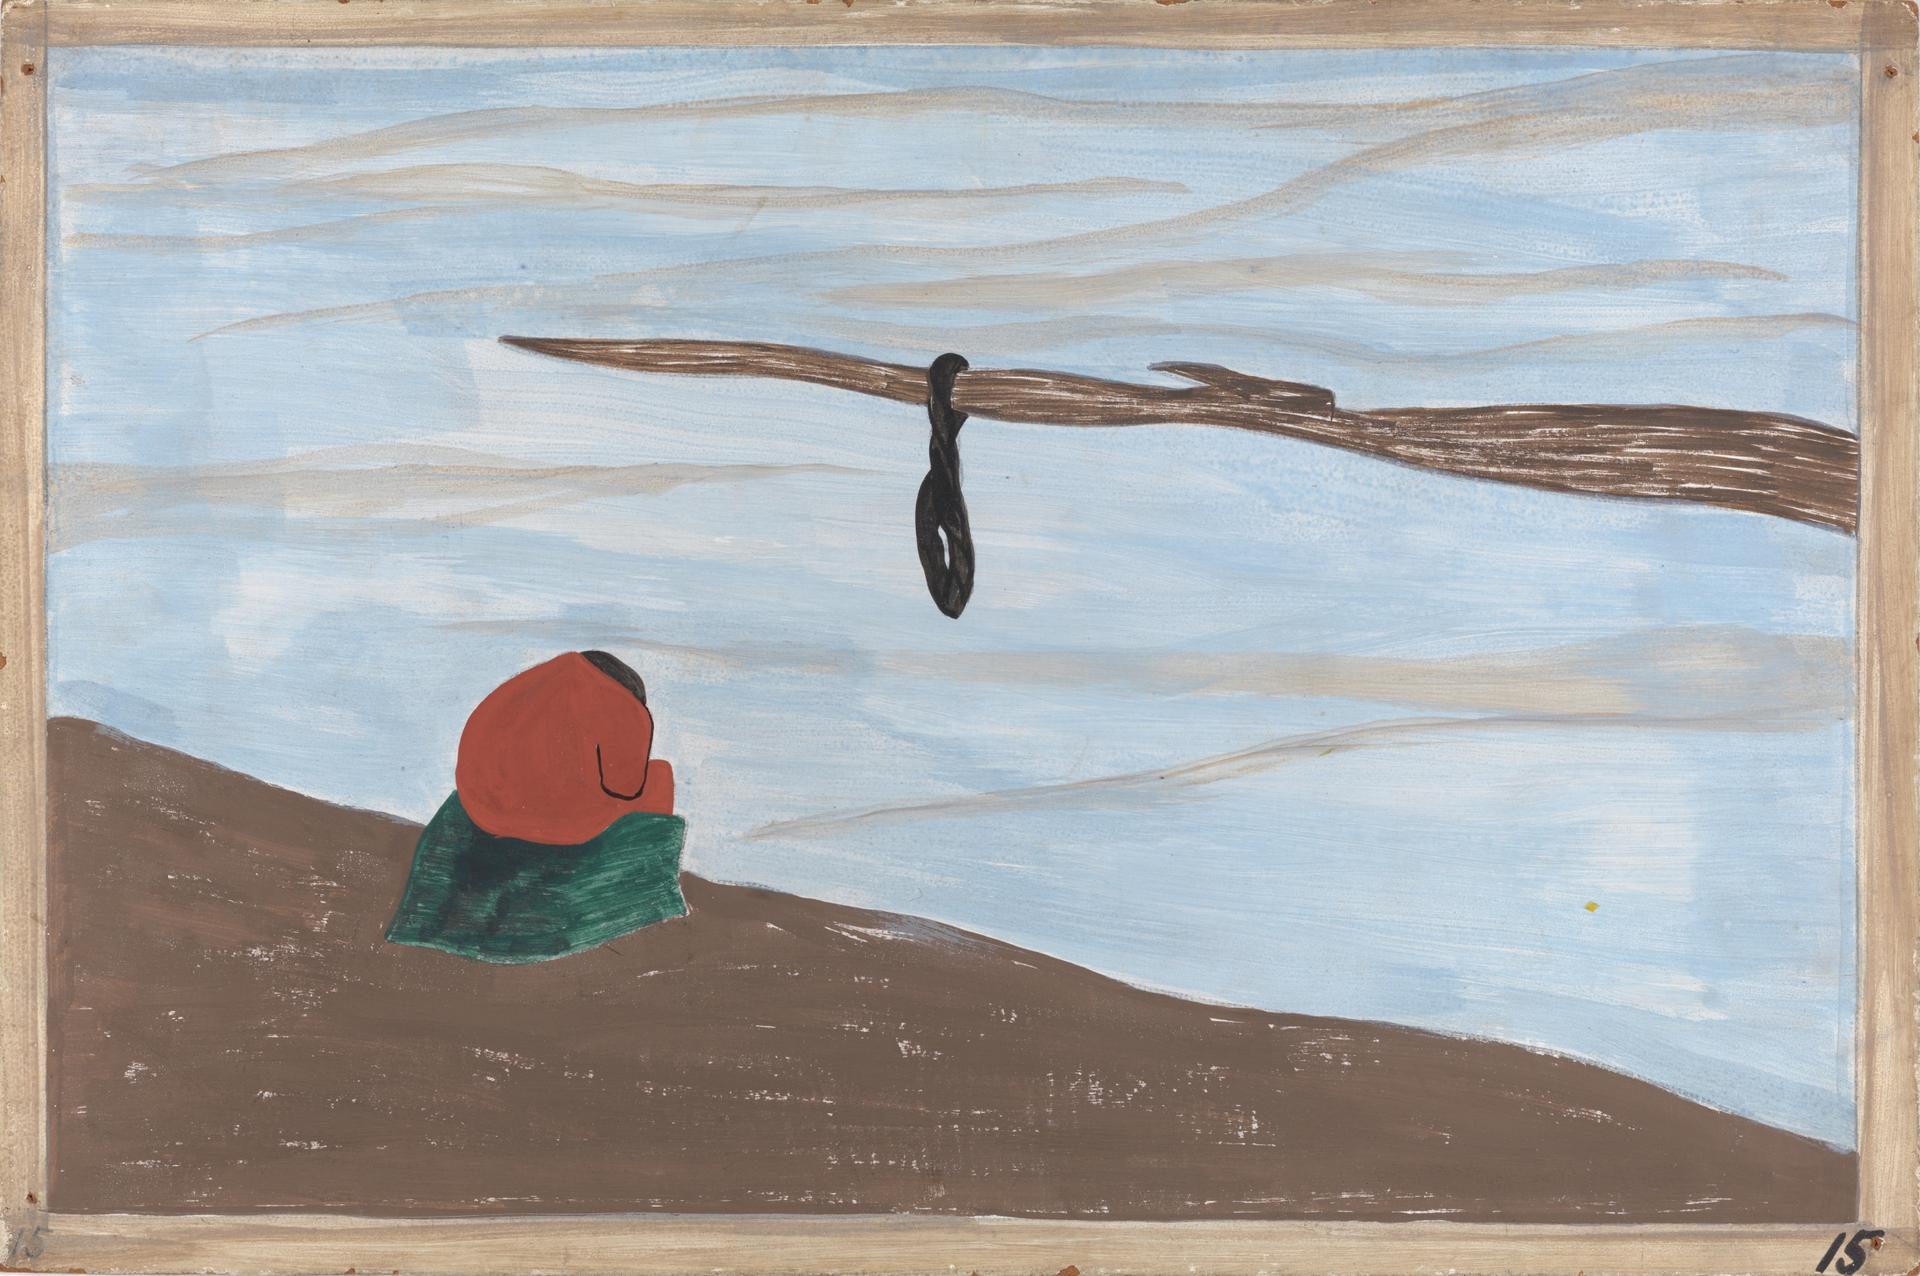 Jacob Lawrence, “The Migration Series, Panel no. 15: There were lynchings.,” 1940–41. Casein tempera on hardboard, 12 x 18 in.